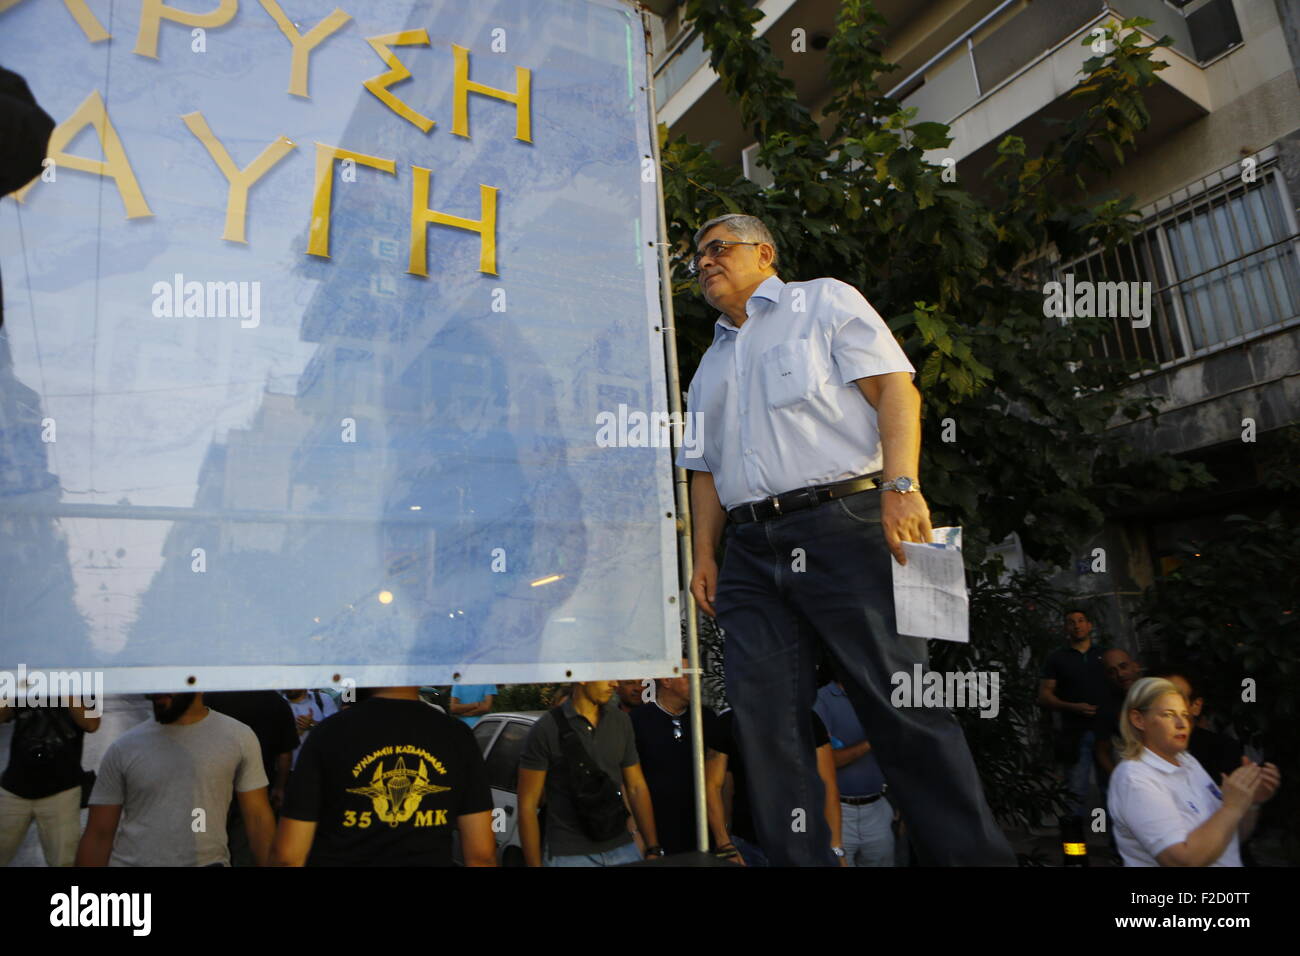 Athens, Greece. 16th September 2015. Nikolaos Michaloliakos, the General Secretary of Golden Dawn, gets on the stage at the election rally. Greek right wing  party Golden Dawn held an election rally in Athens, four days ahead of election day. The party hopes to gain enough seats in the election to become the third latest party in the Greek Parliament. Credit:  Michael Debets/Alamy Live News Stock Photo